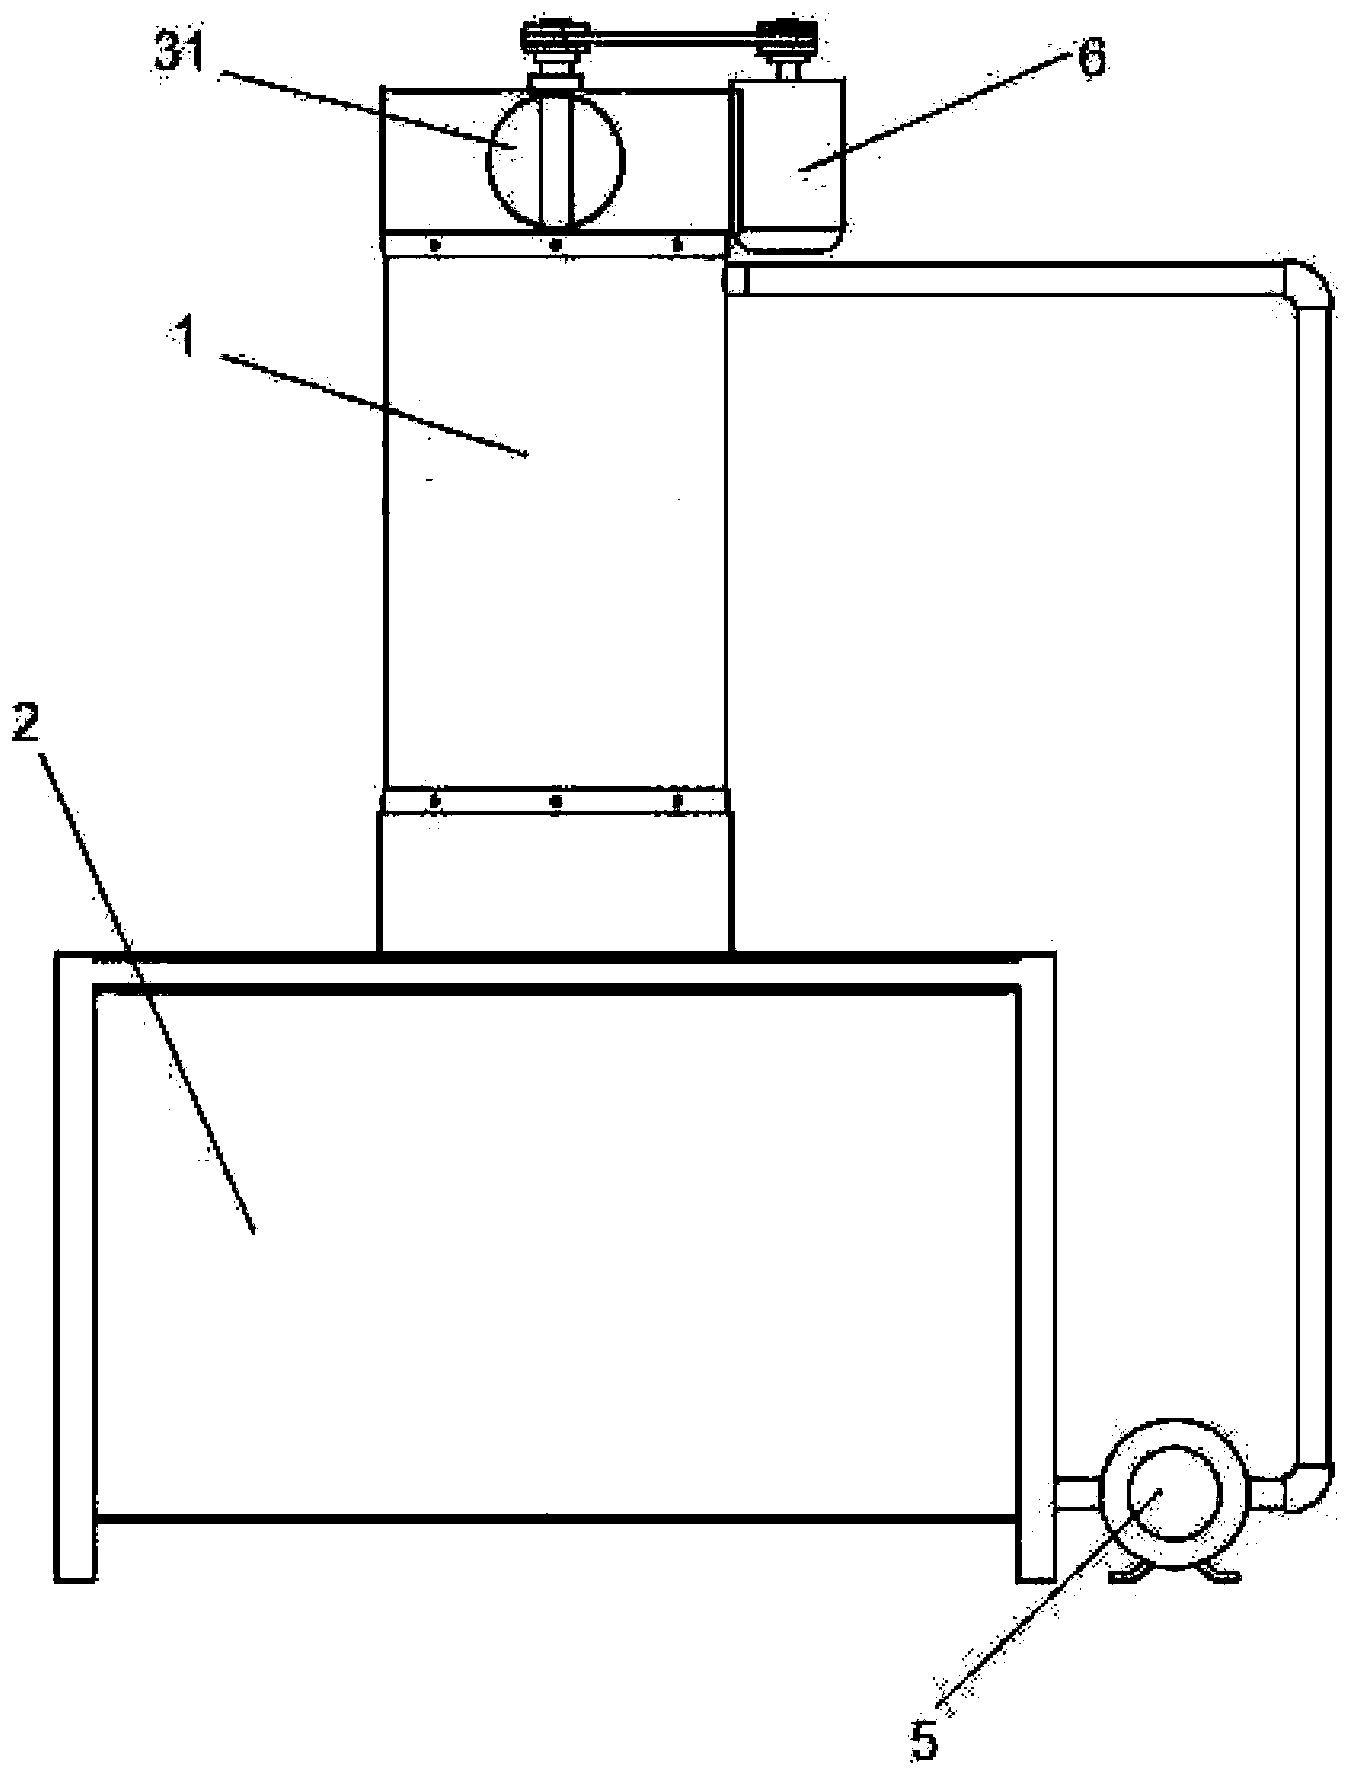 Gas-liquid mixing device and method